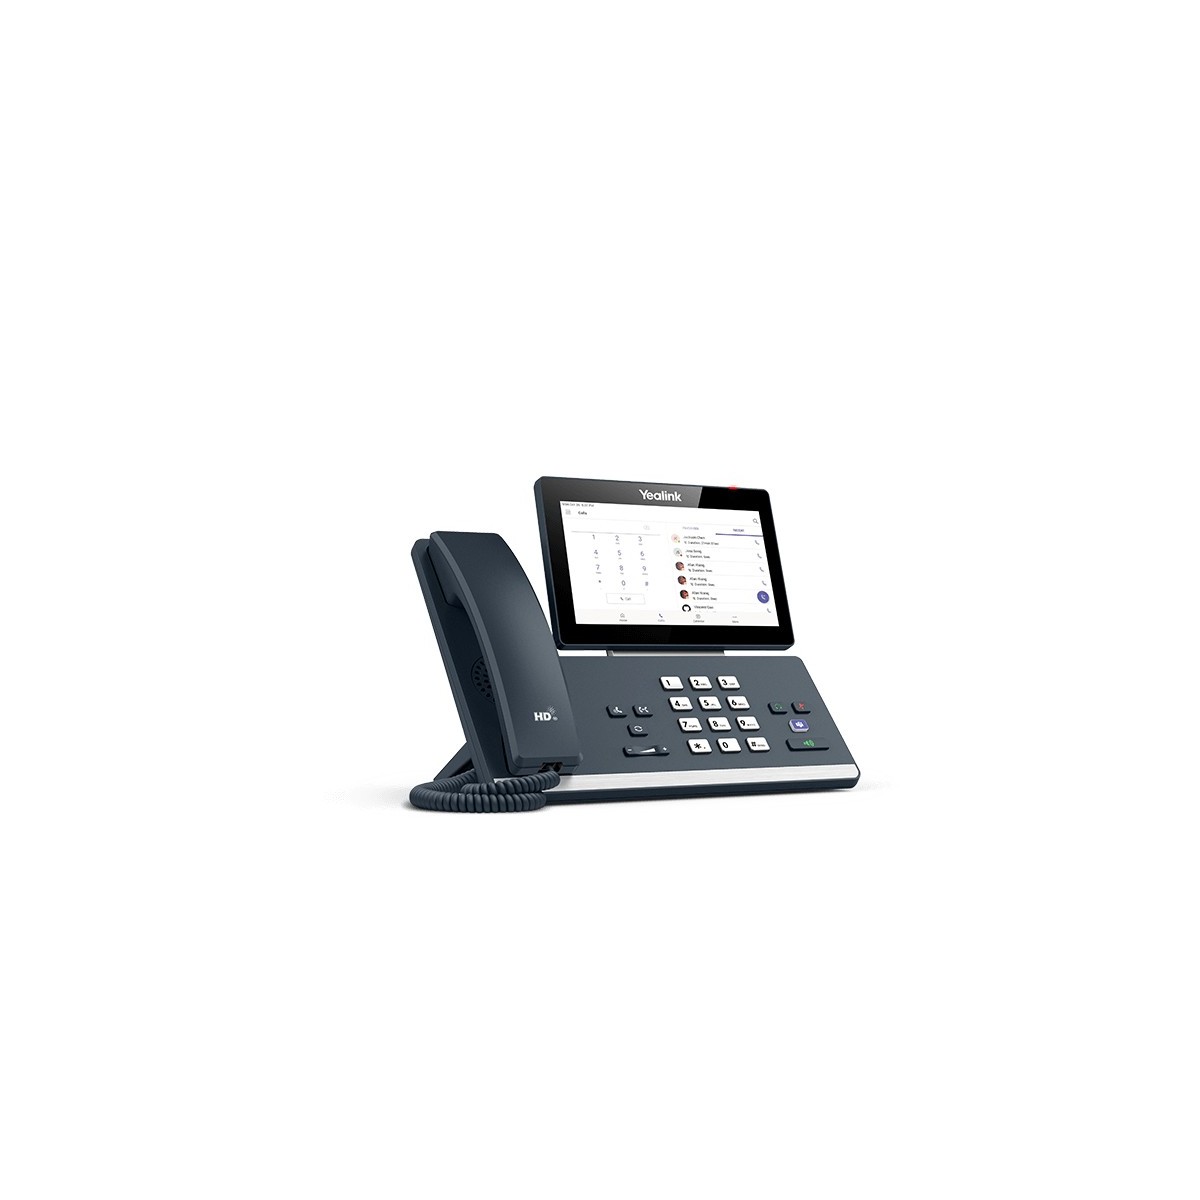 Yealink MP58 - Skype for Business Edition - VoIP-Telefon - VoIP-Telefon - Voice-Over-IP